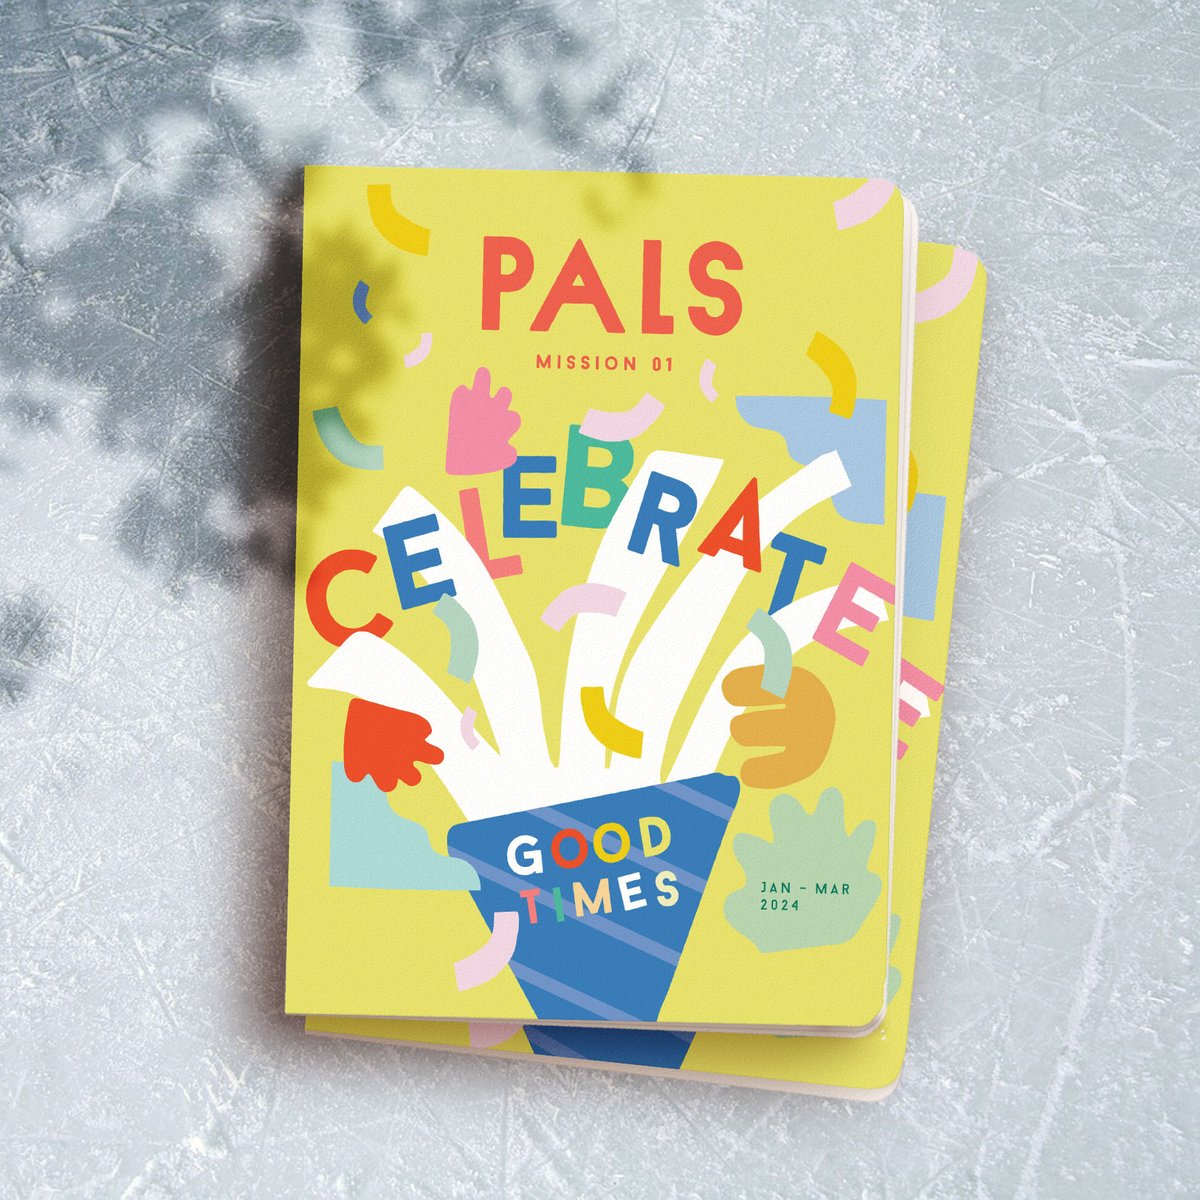 It's time to celebrate, our first PALS Mission of 2024 is here! 🎉⁠ ⁠A PALS passport includes a free treat from @PaciugoGelato, @bywoops, @JambaJuice and a completion prize if at least 8 stamps are collected by Mar 31! To pick up your passport, visit Guest Services (Level 1).